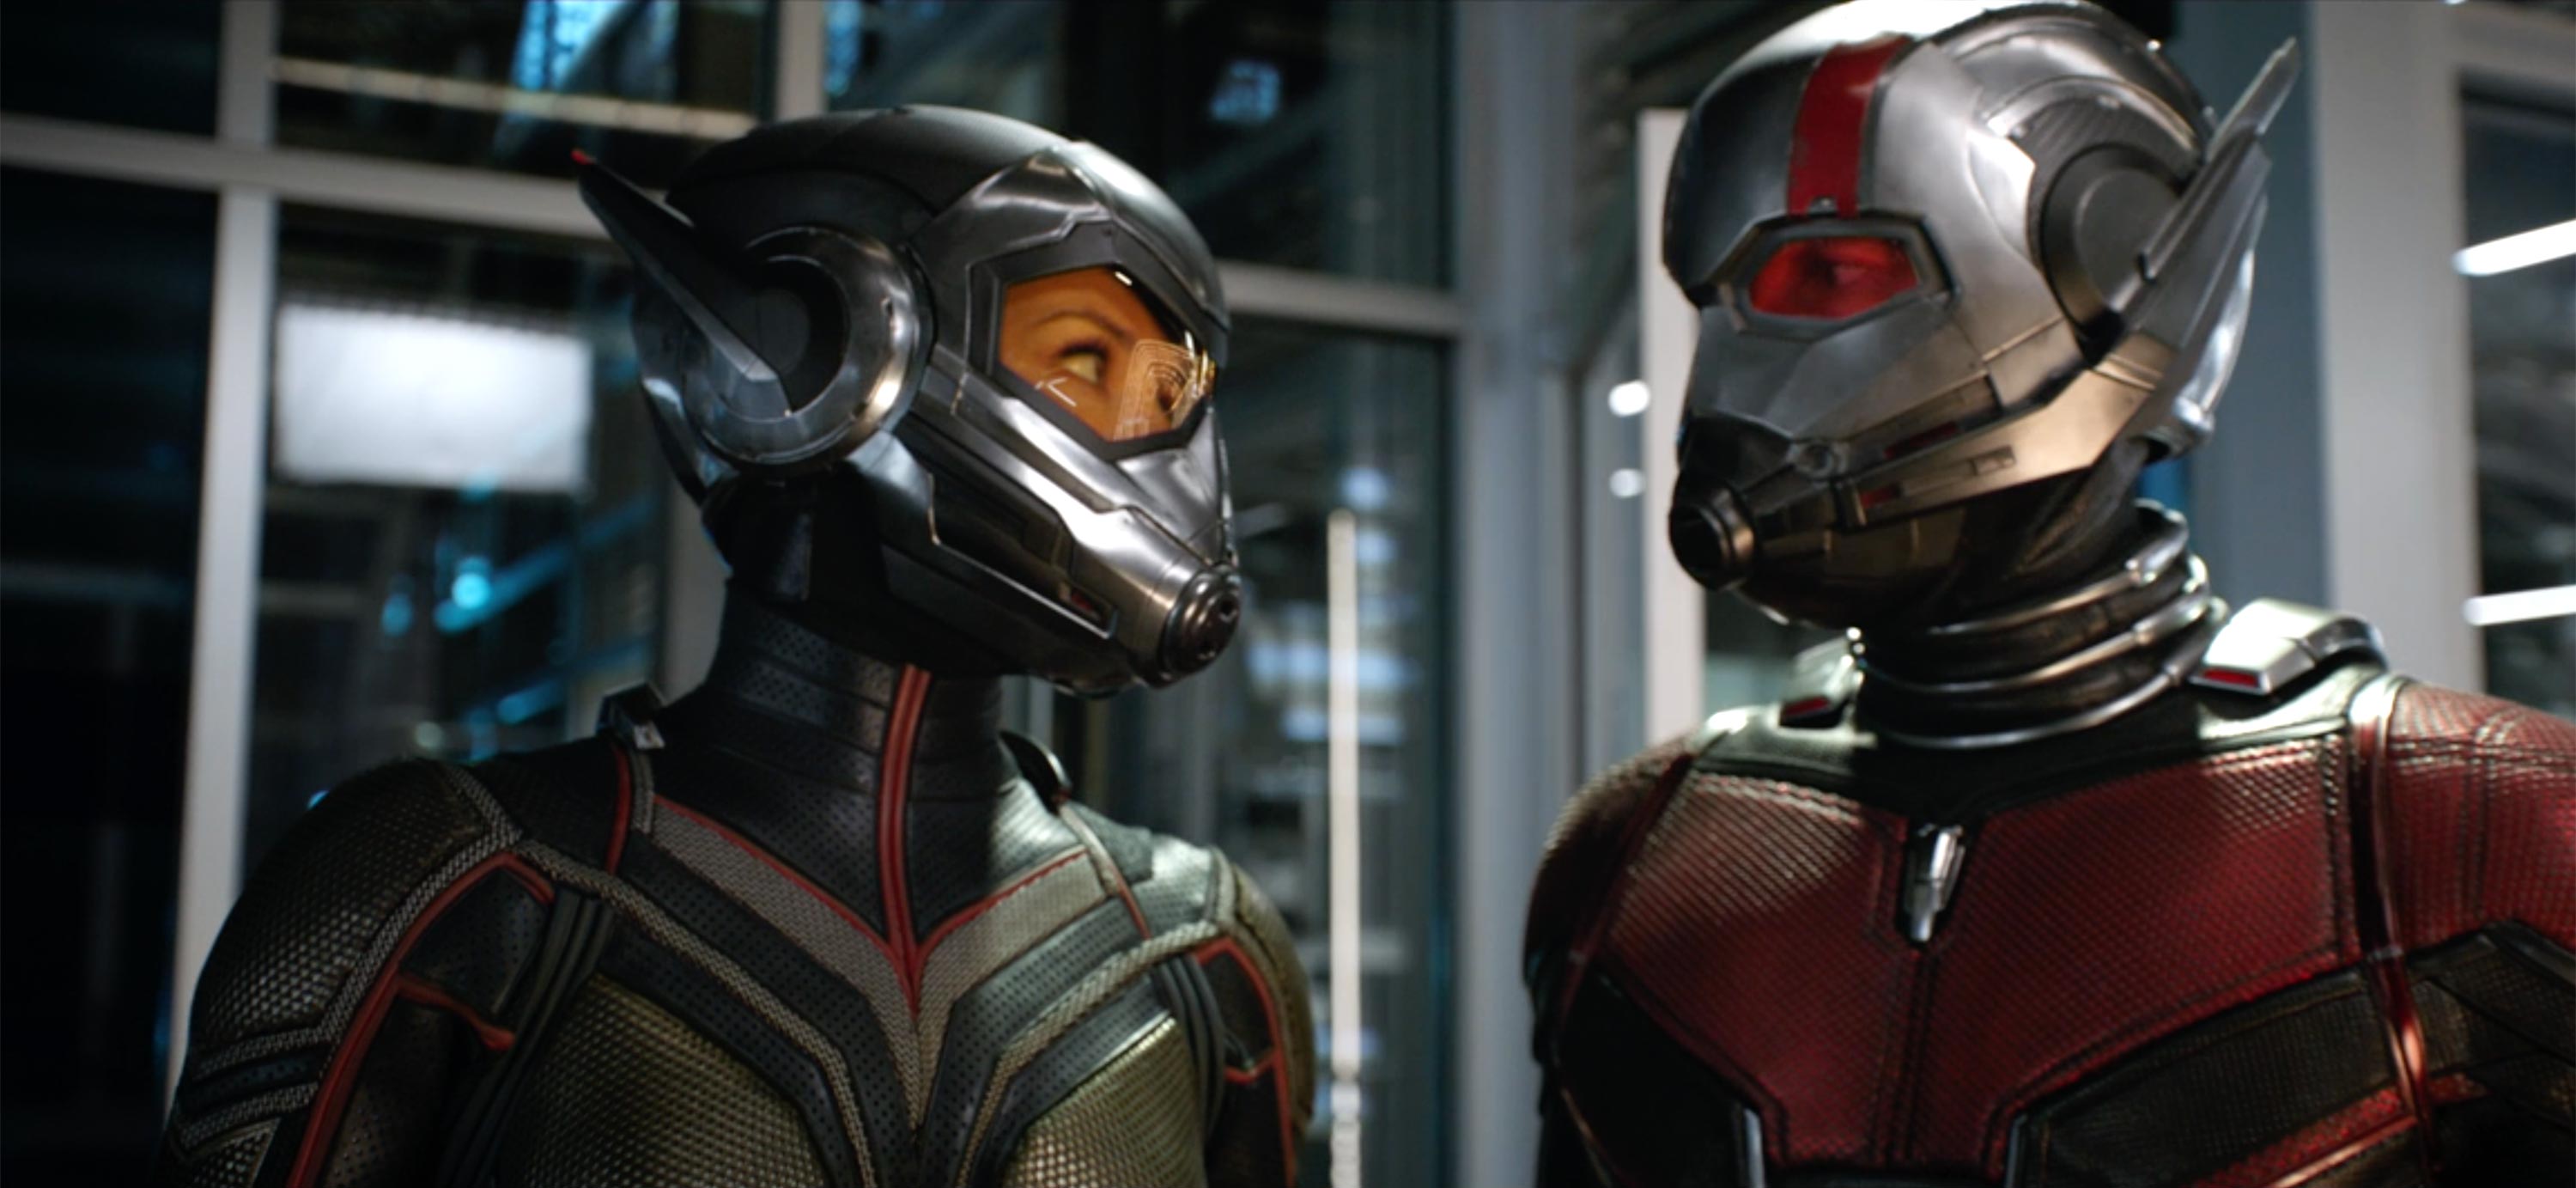 Ant-Man and The Wasp trailer has size-changing battles and 